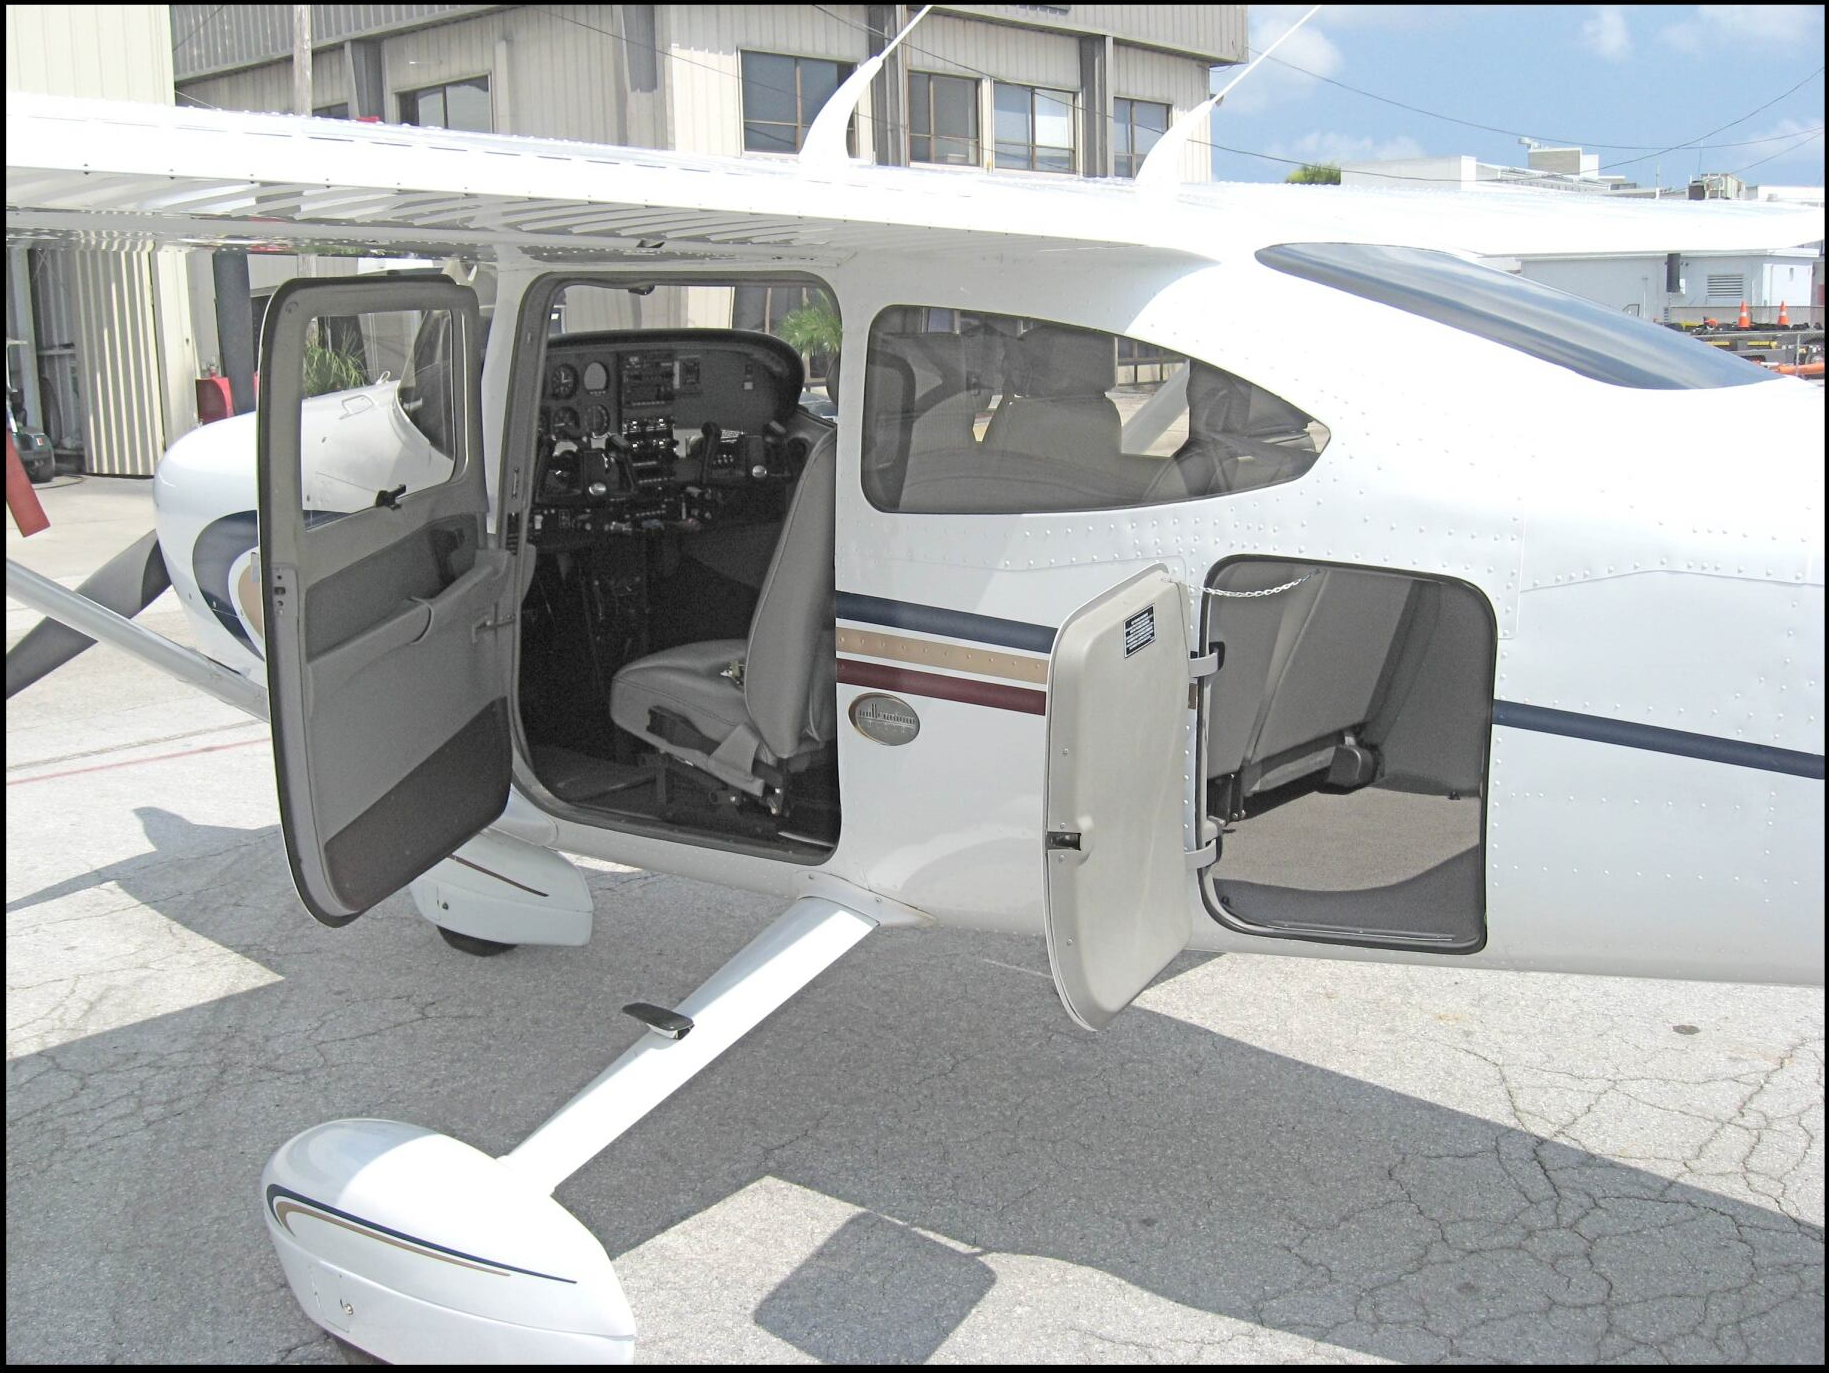 Aircraft Appraisal Service Throughout the United States